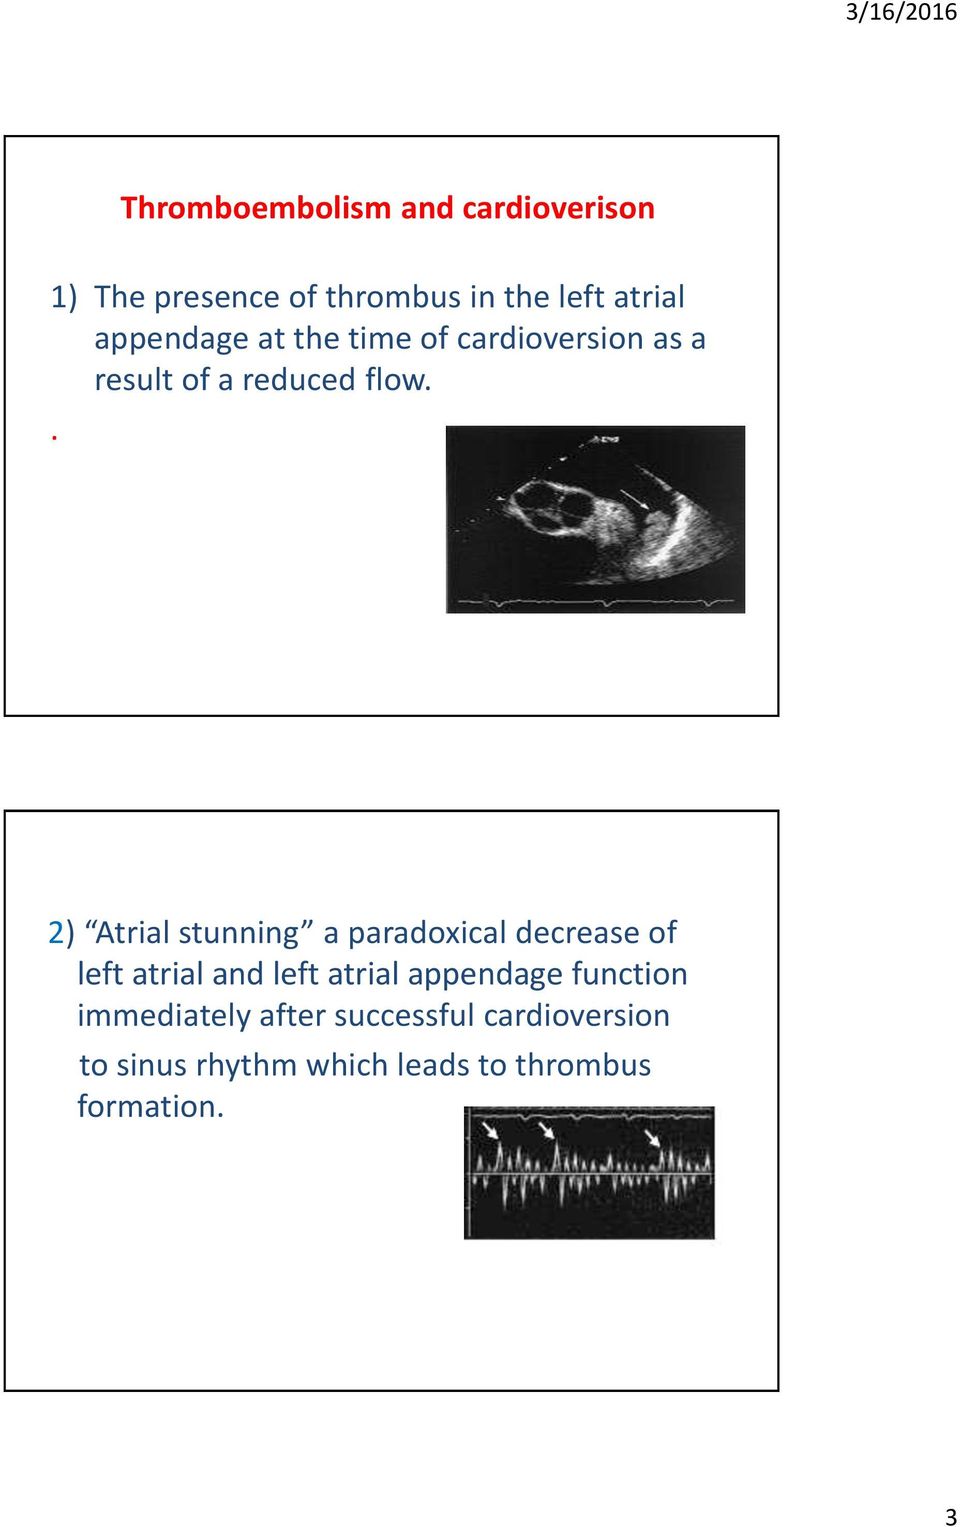 . 2) Atrial stunning a paradoxical decrease of left atrial and left atrial appendage